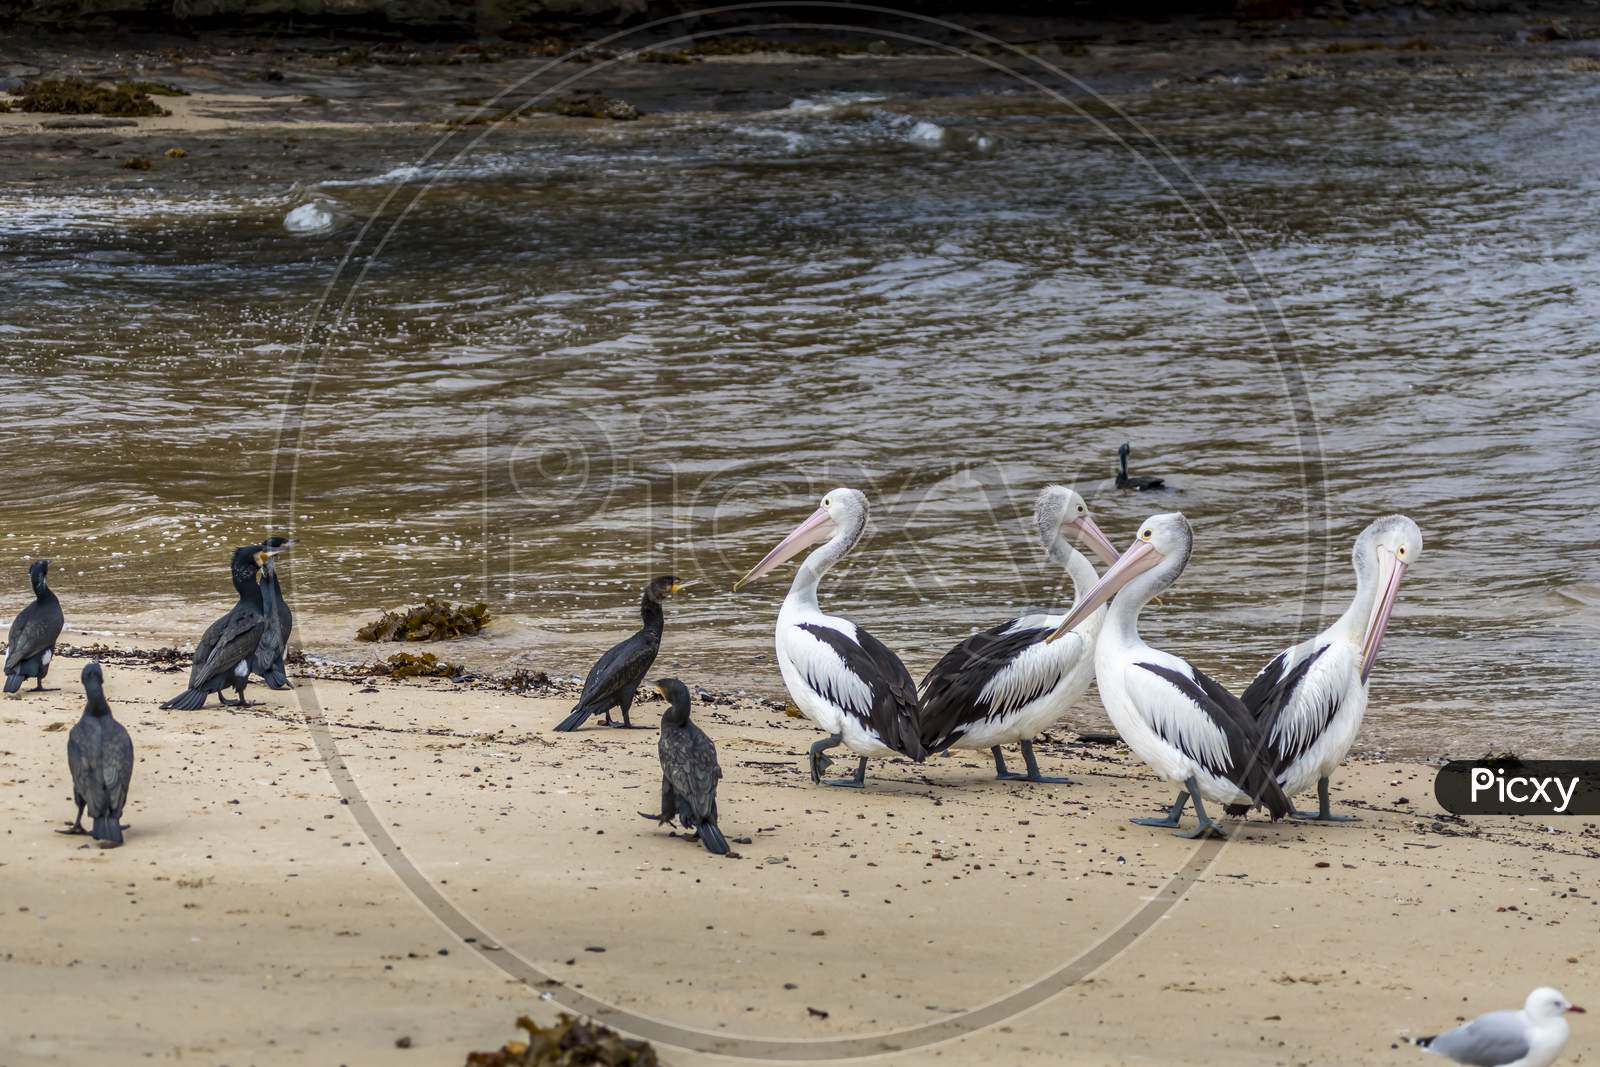 Pelican and other waterbirds at a beach in Victoria, Australia at a rainy day in summer.